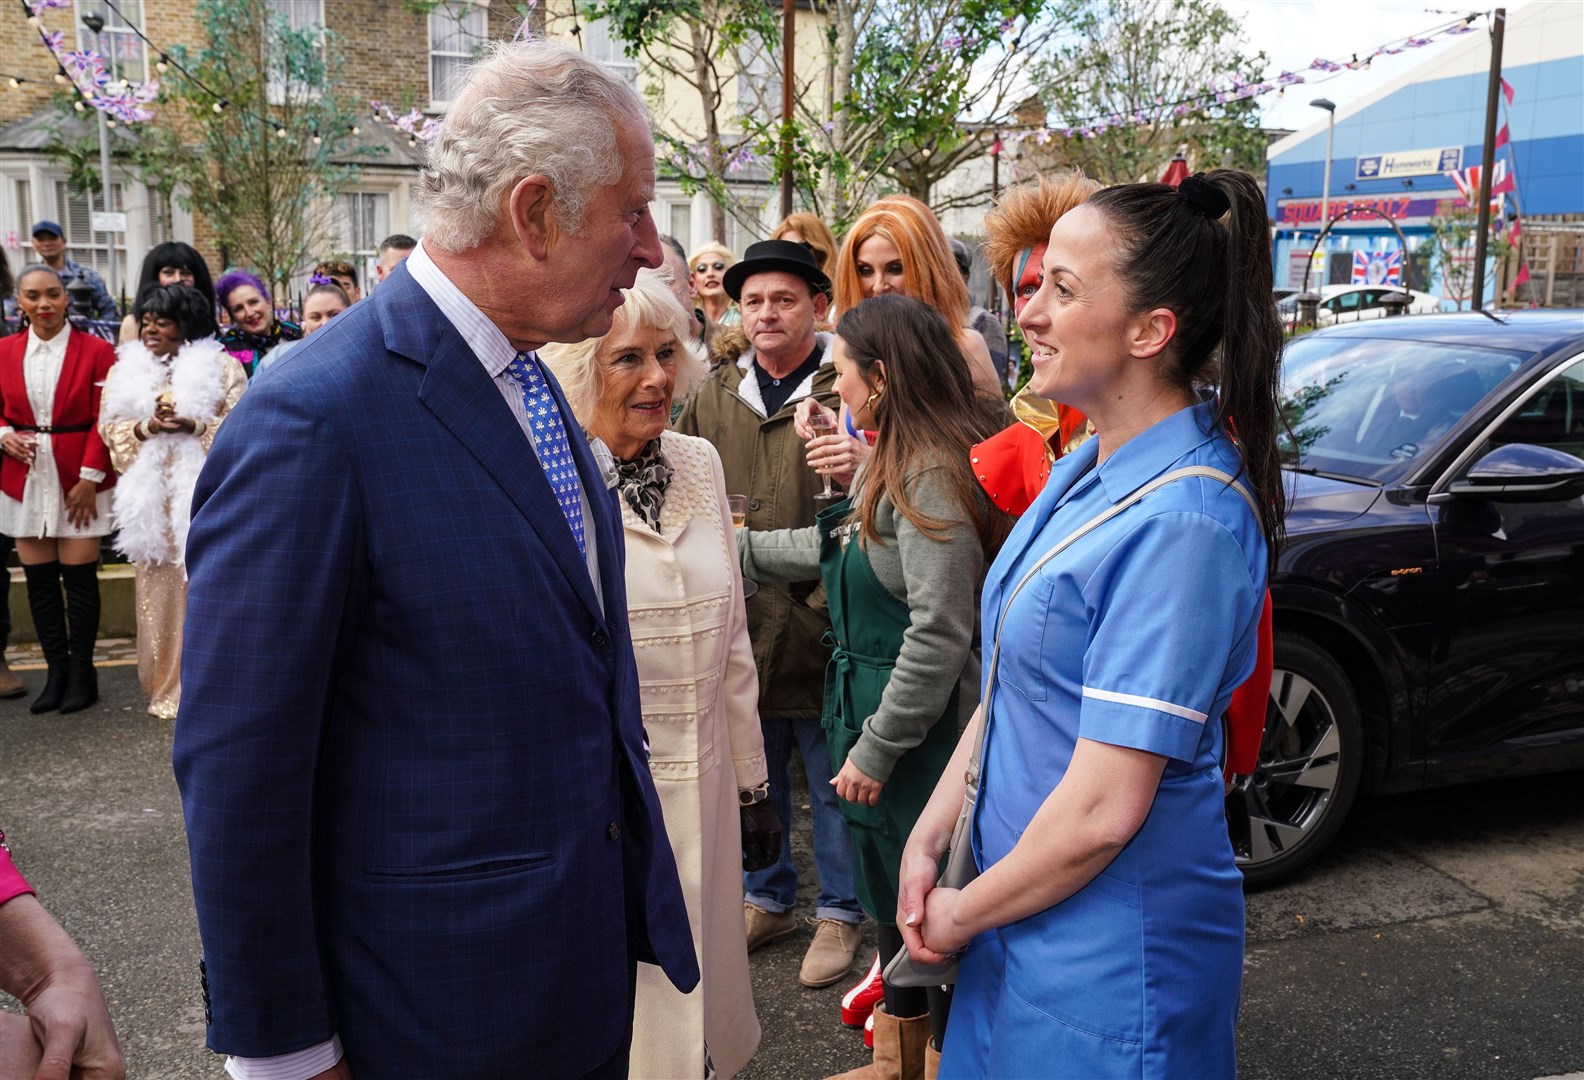 The scenes were filmed when Charles and Camilla visited the EastEnders set in March (BBC/PA)